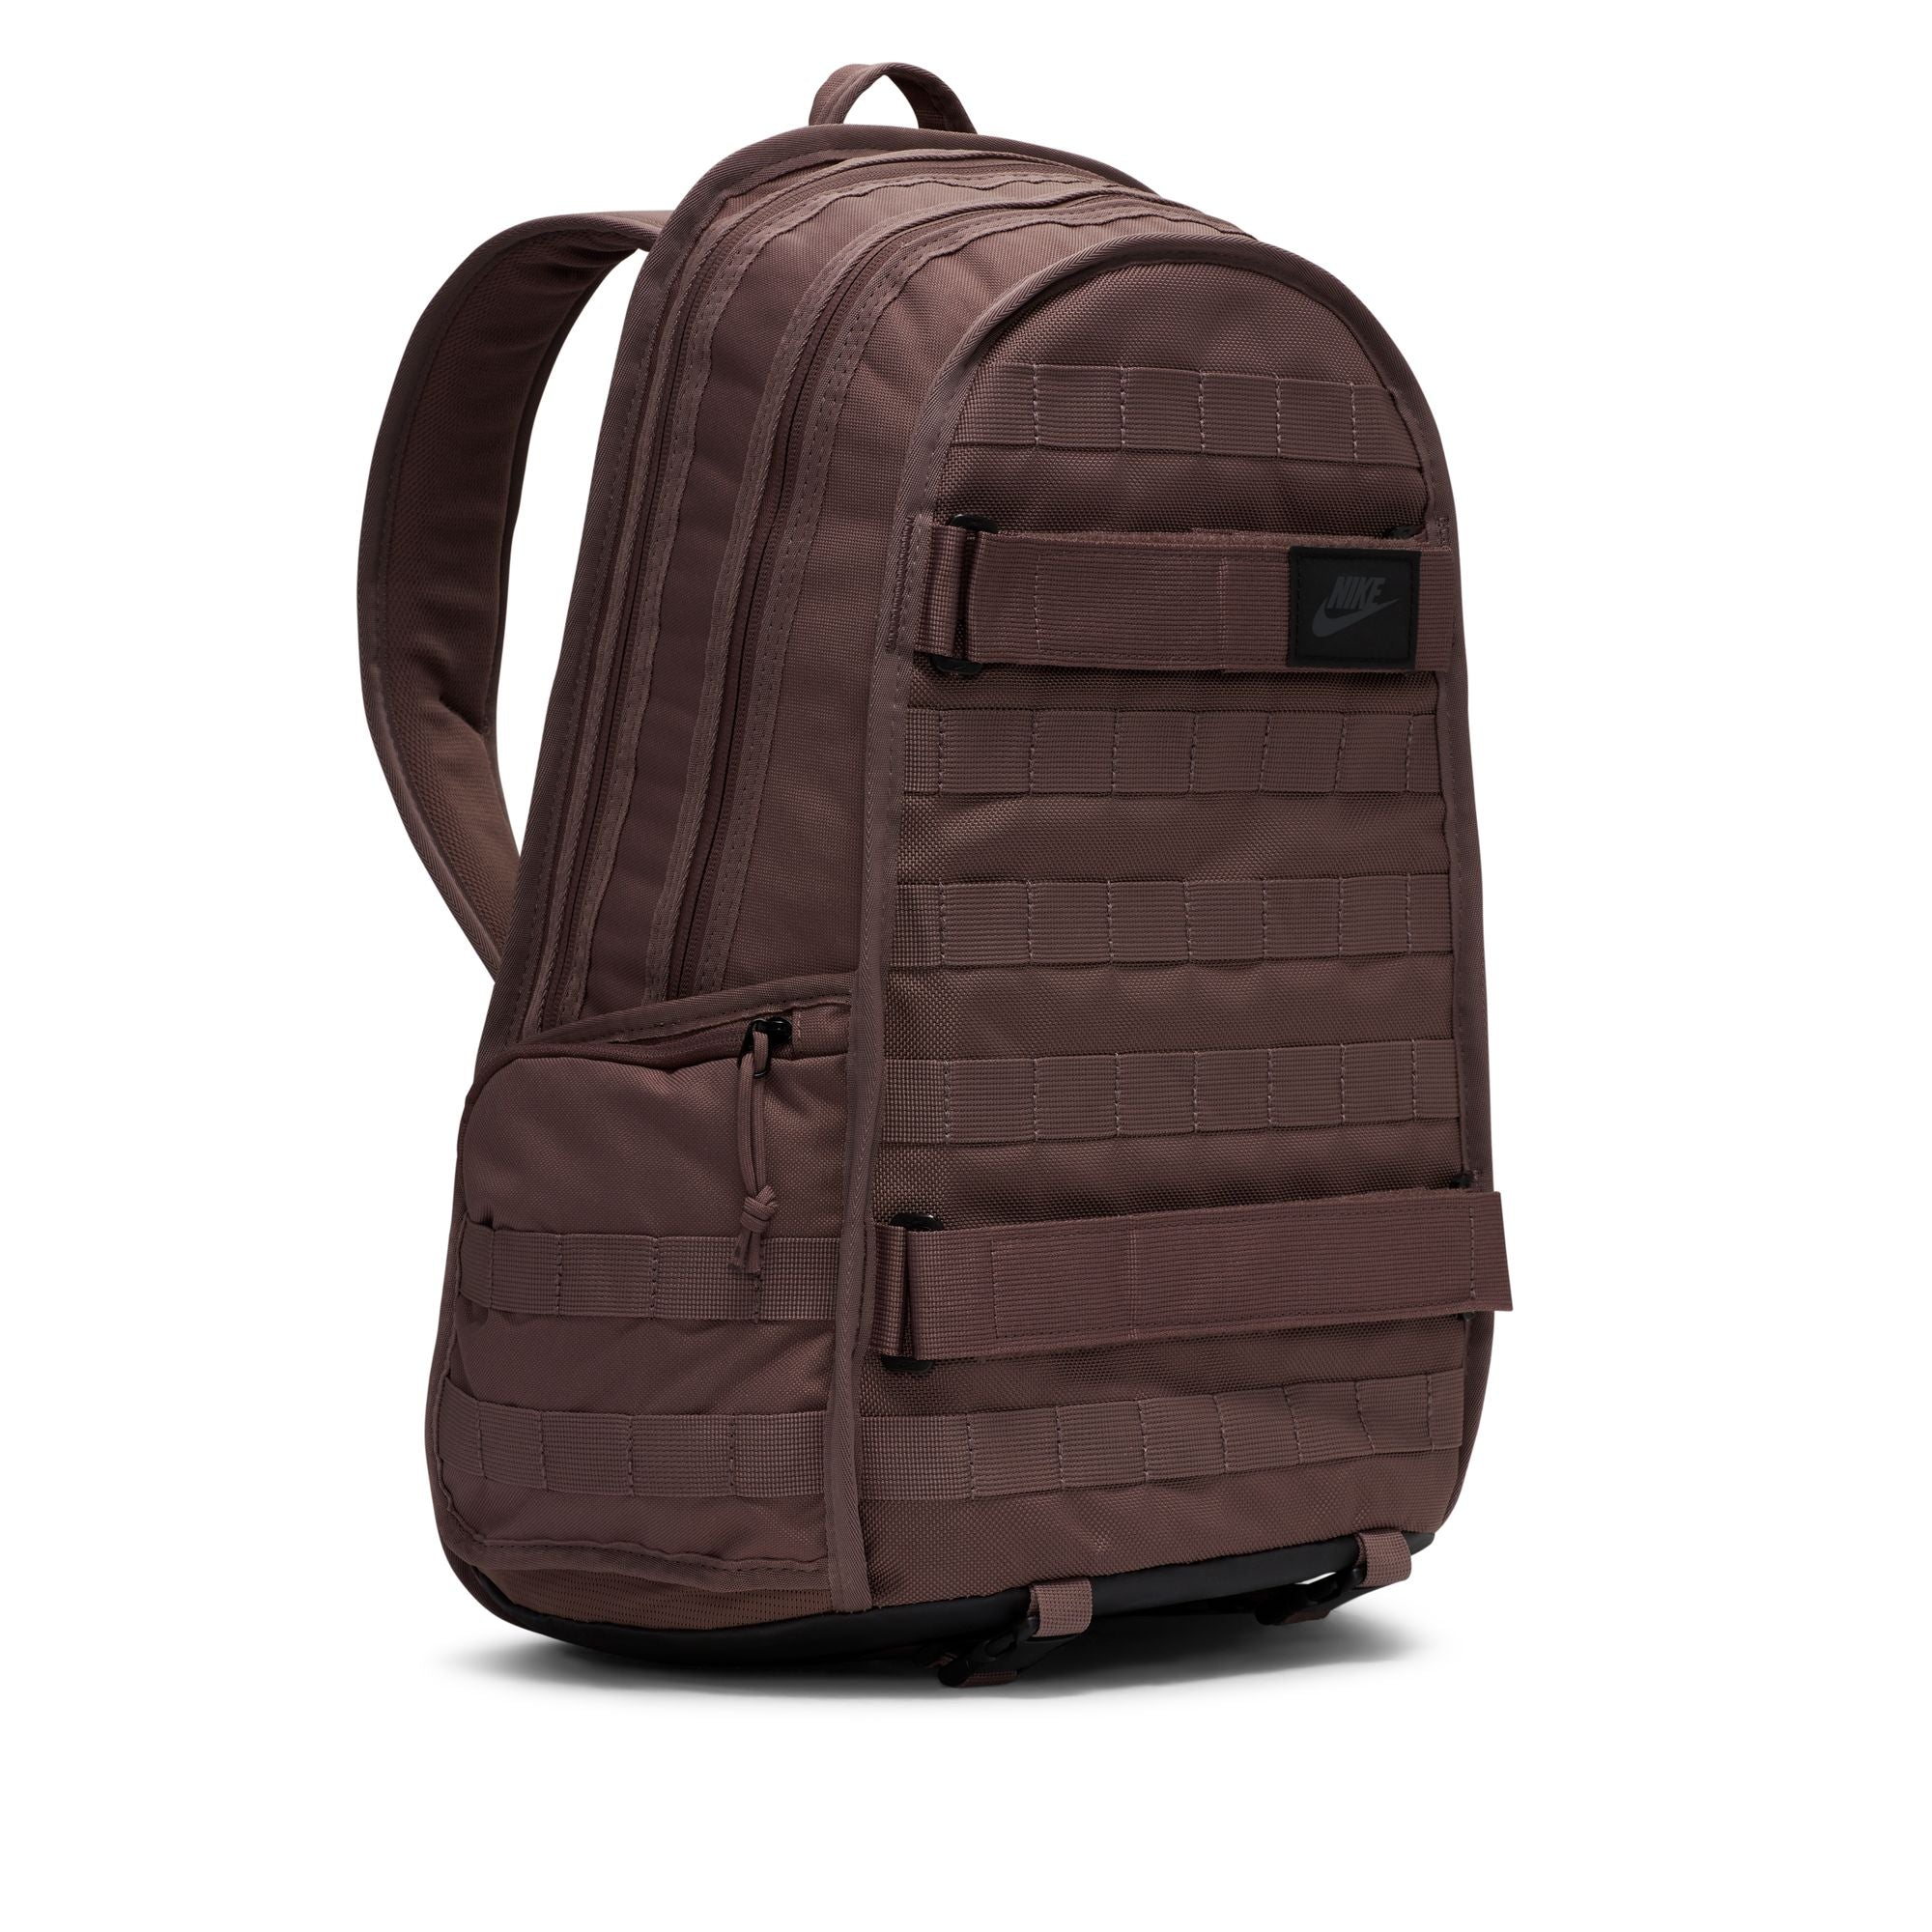 RPM BACKPACK PLUM ECLIPSE